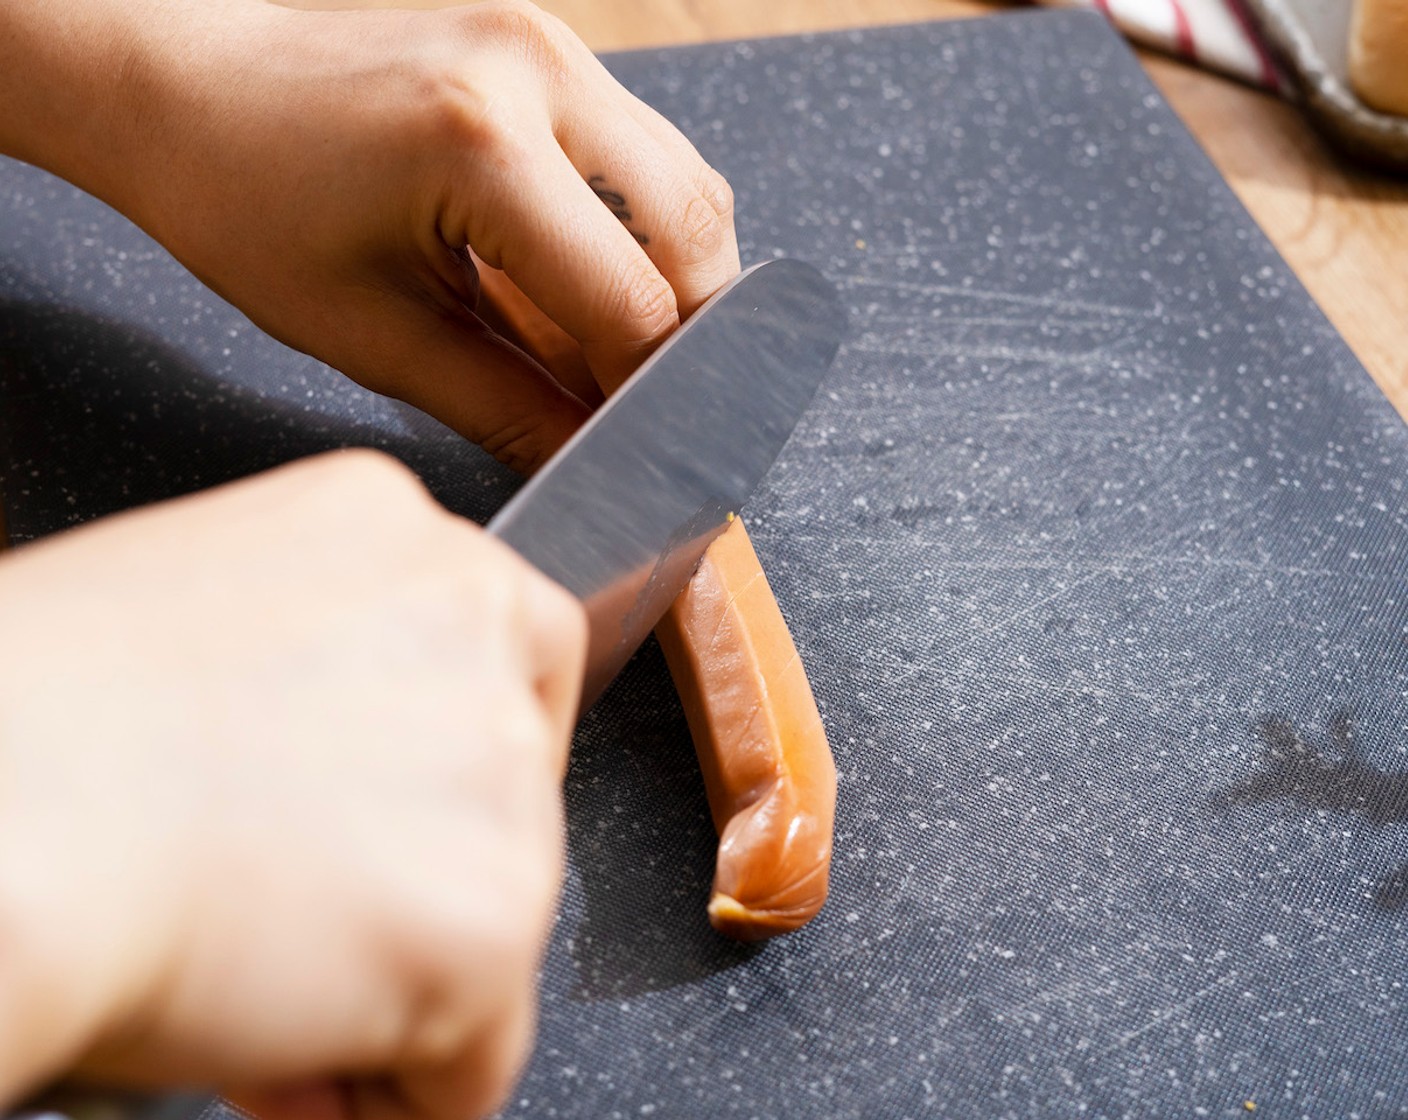 step 2 Cut several slits on two sides of Hot Dogs (4) or cut into shallow Vs or Xs.